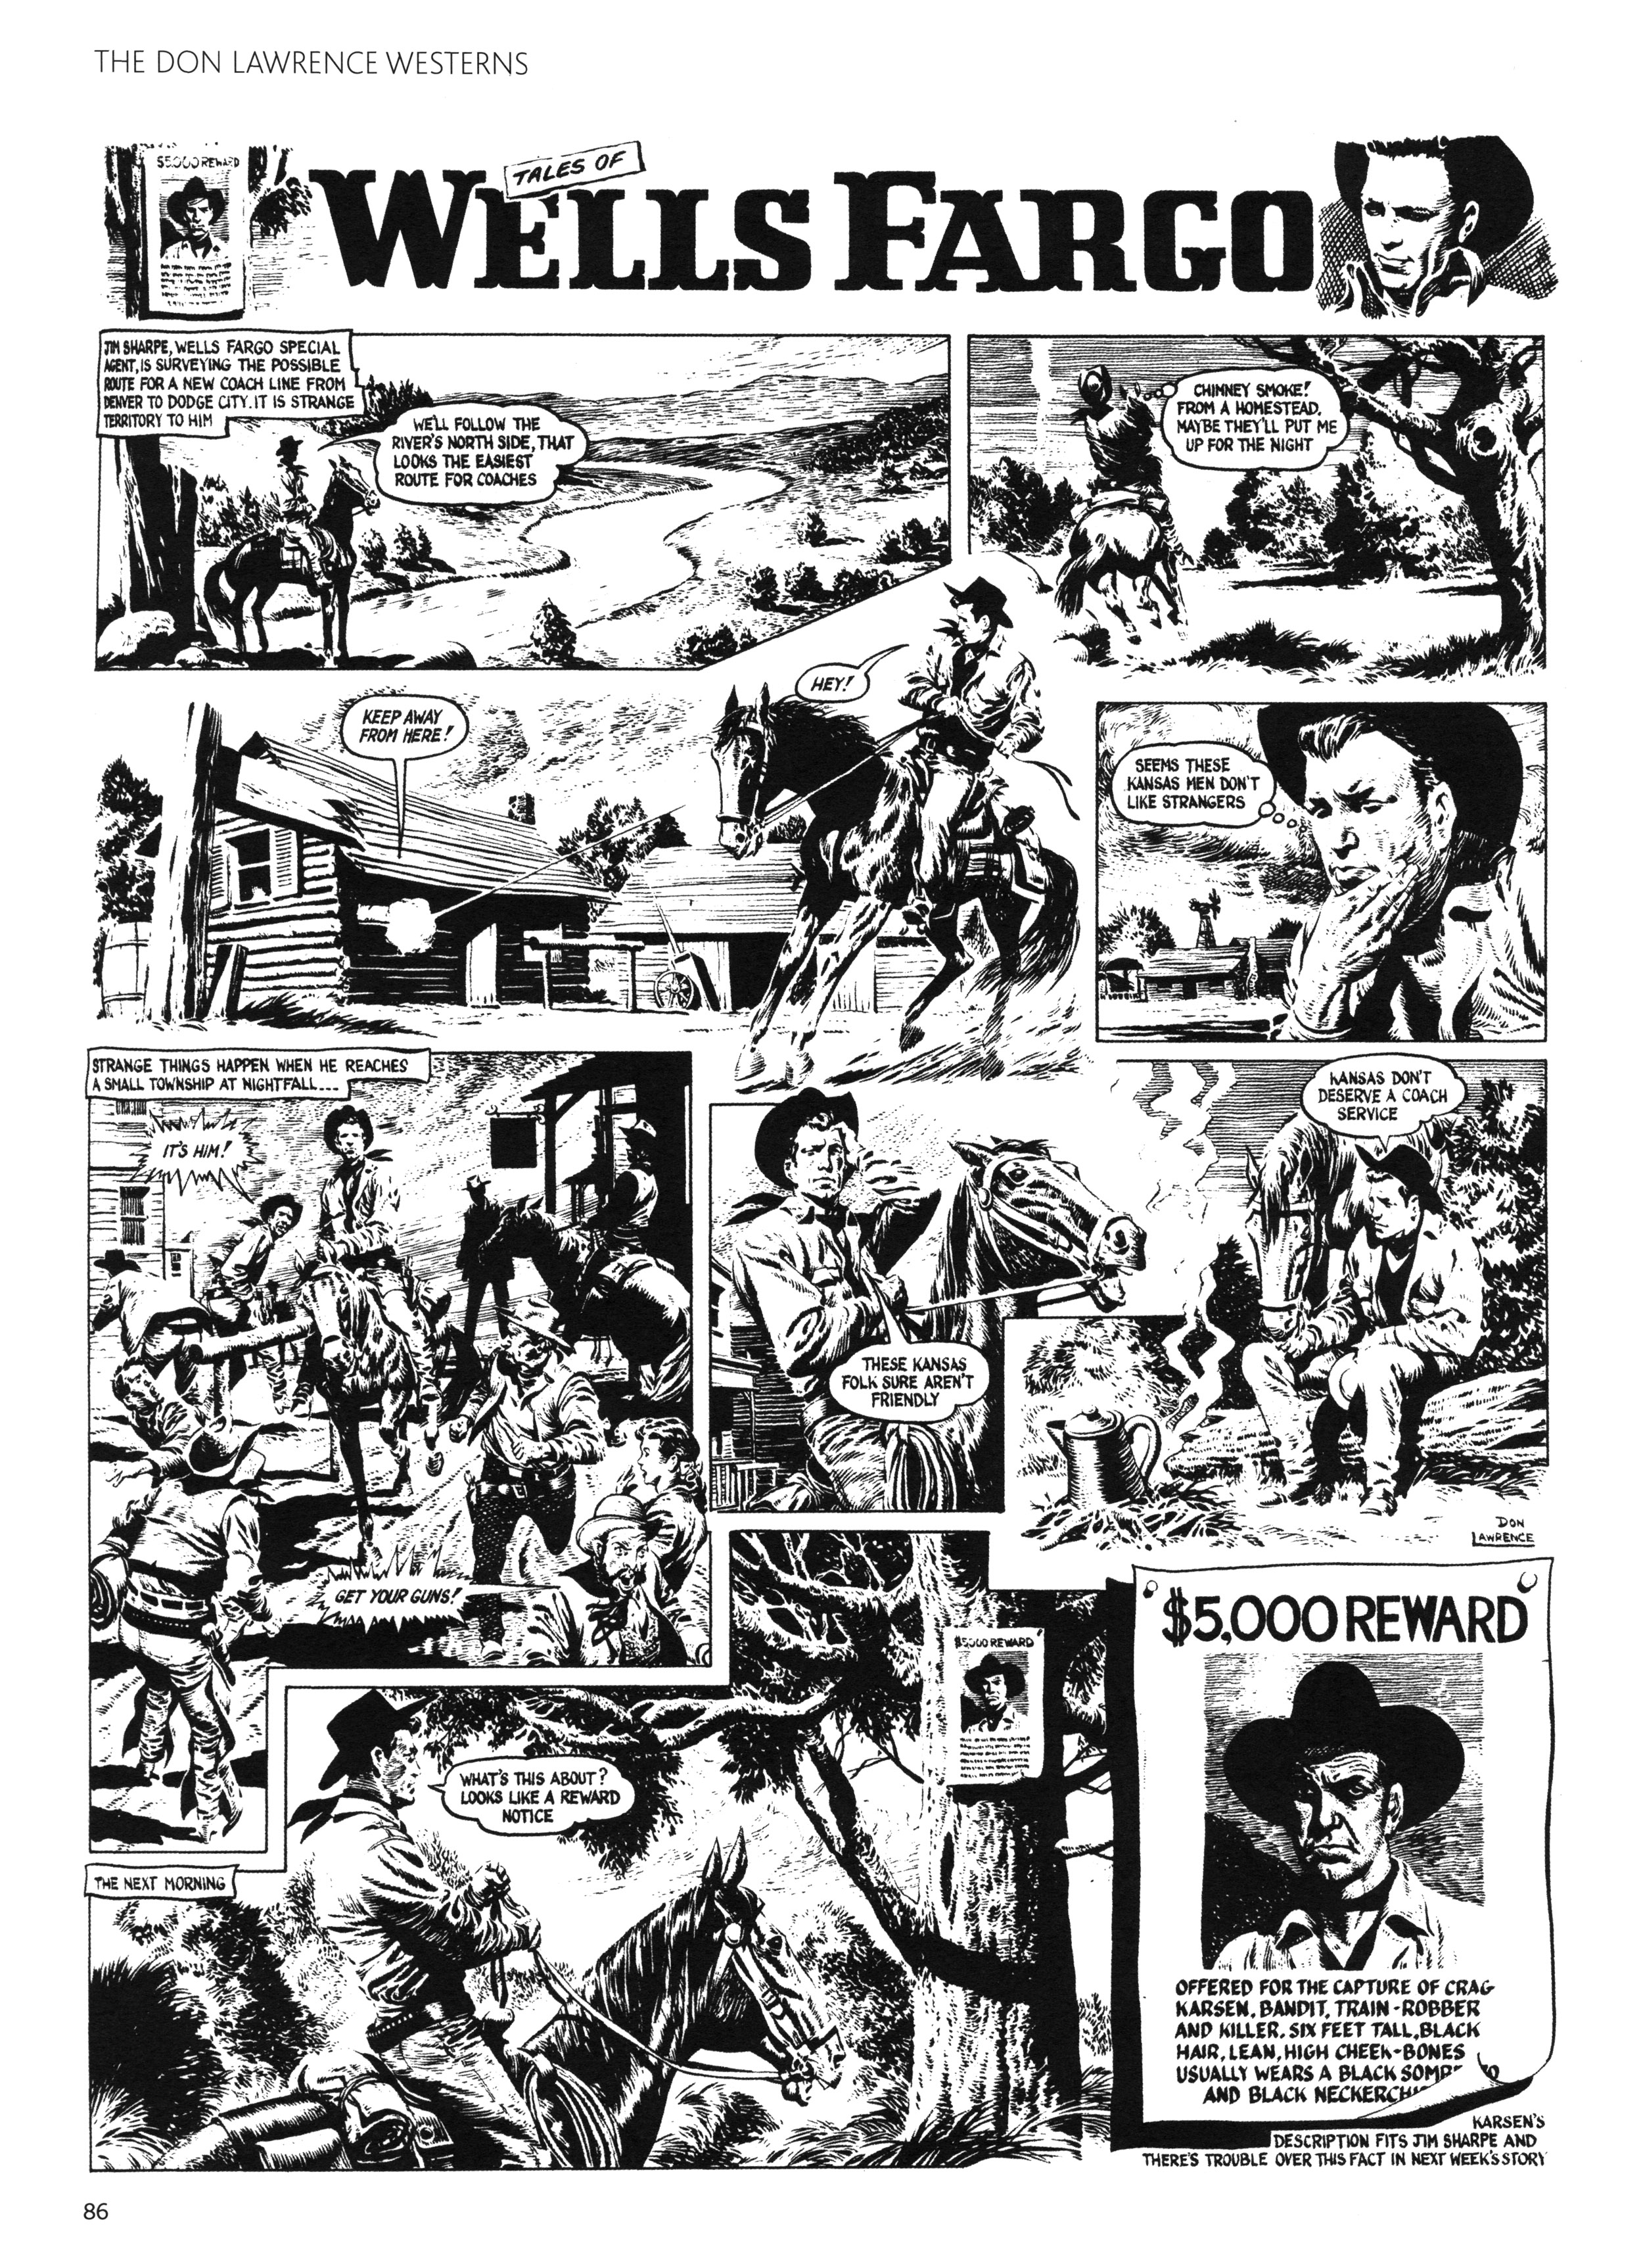 Read online Don Lawrence Westerns comic -  Issue # TPB (Part 1) - 90